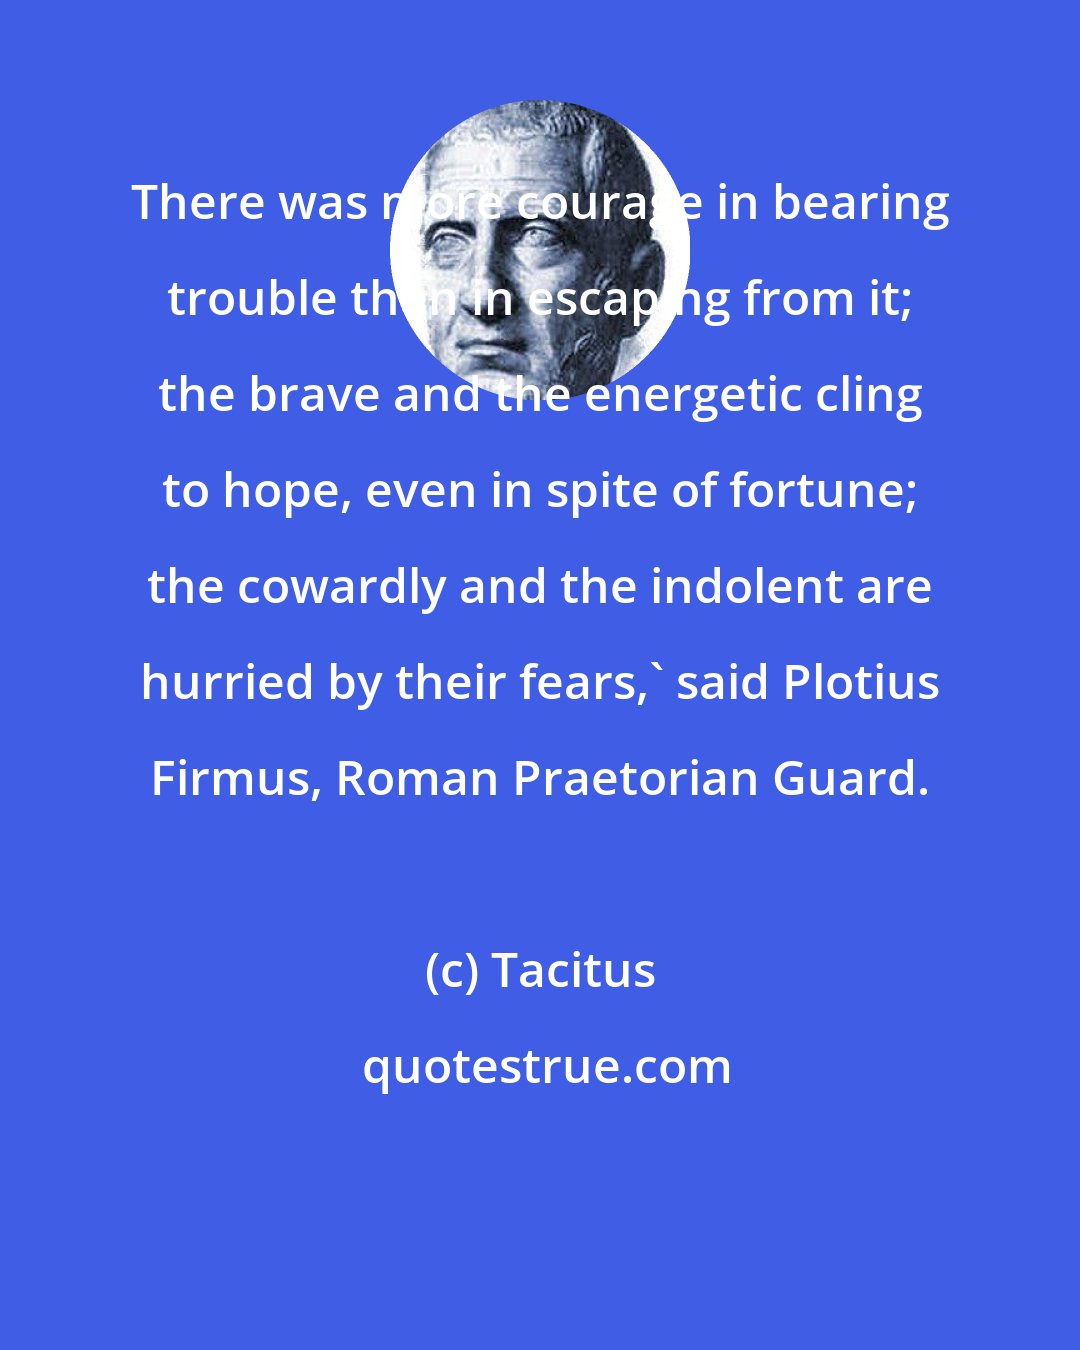 Tacitus: There was more courage in bearing trouble than in escaping from it; the brave and the energetic cling to hope, even in spite of fortune; the cowardly and the indolent are hurried by their fears,' said Plotius Firmus, Roman Praetorian Guard.